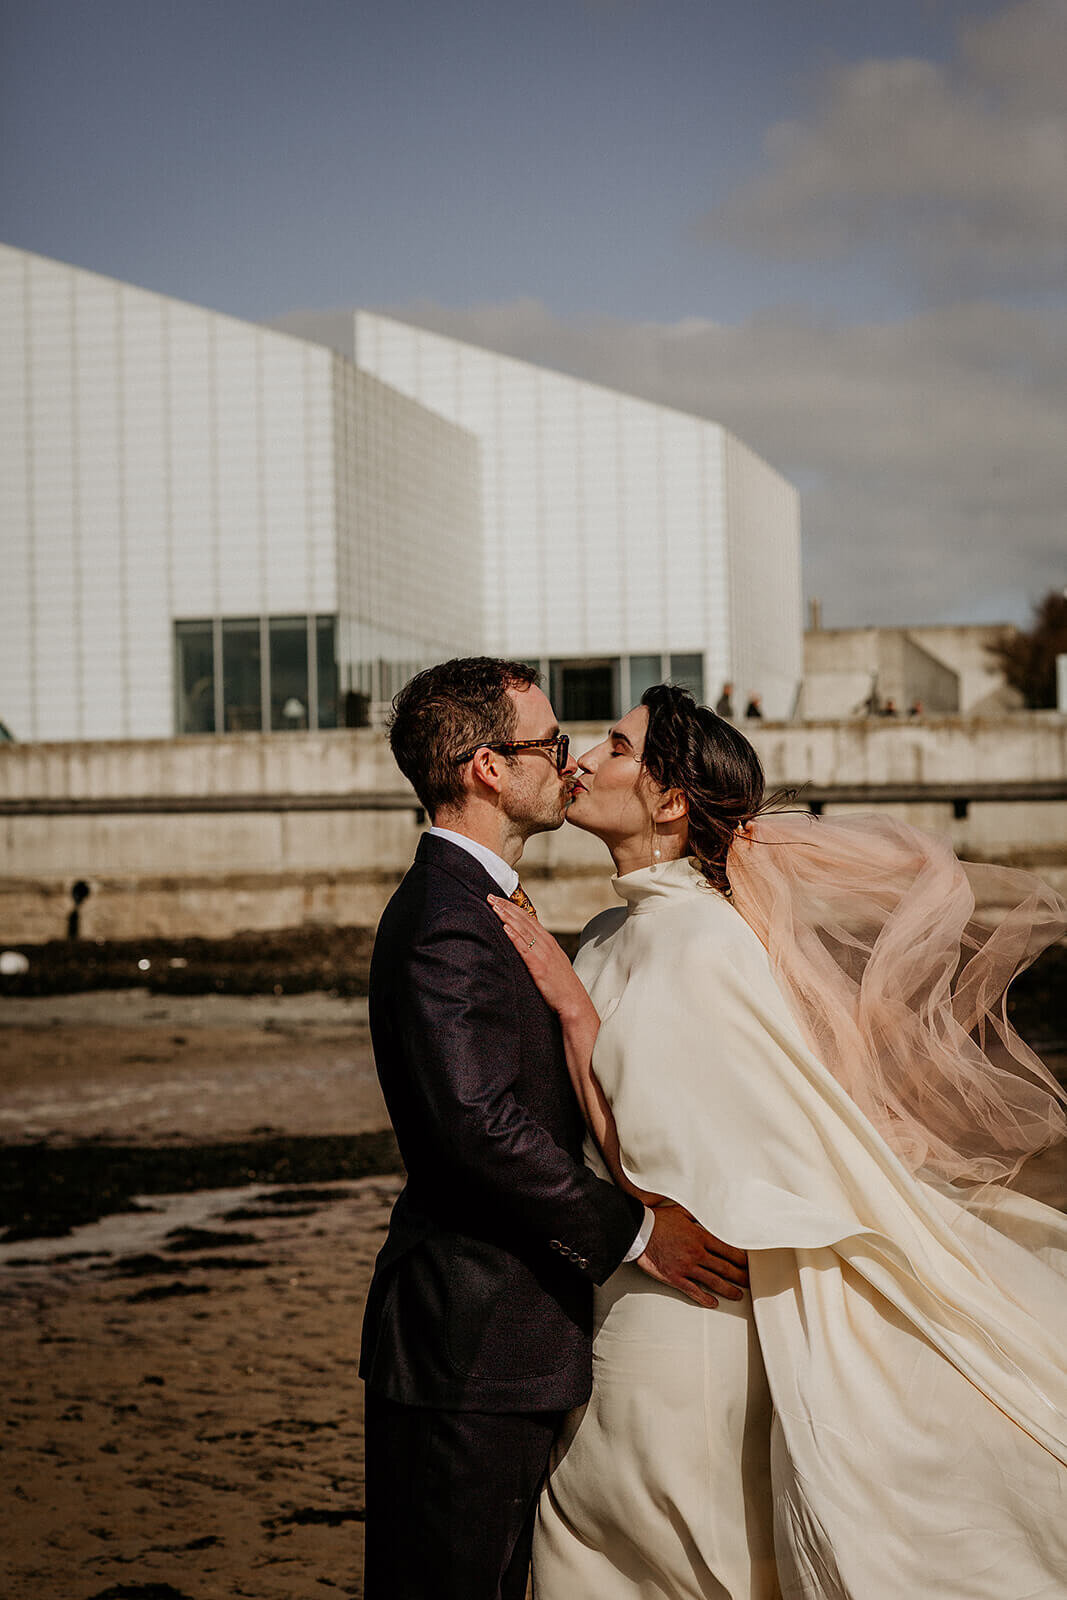 Turner Contemporary wedding couple.  On the beach kissing. Wind blowing peach coloured veil